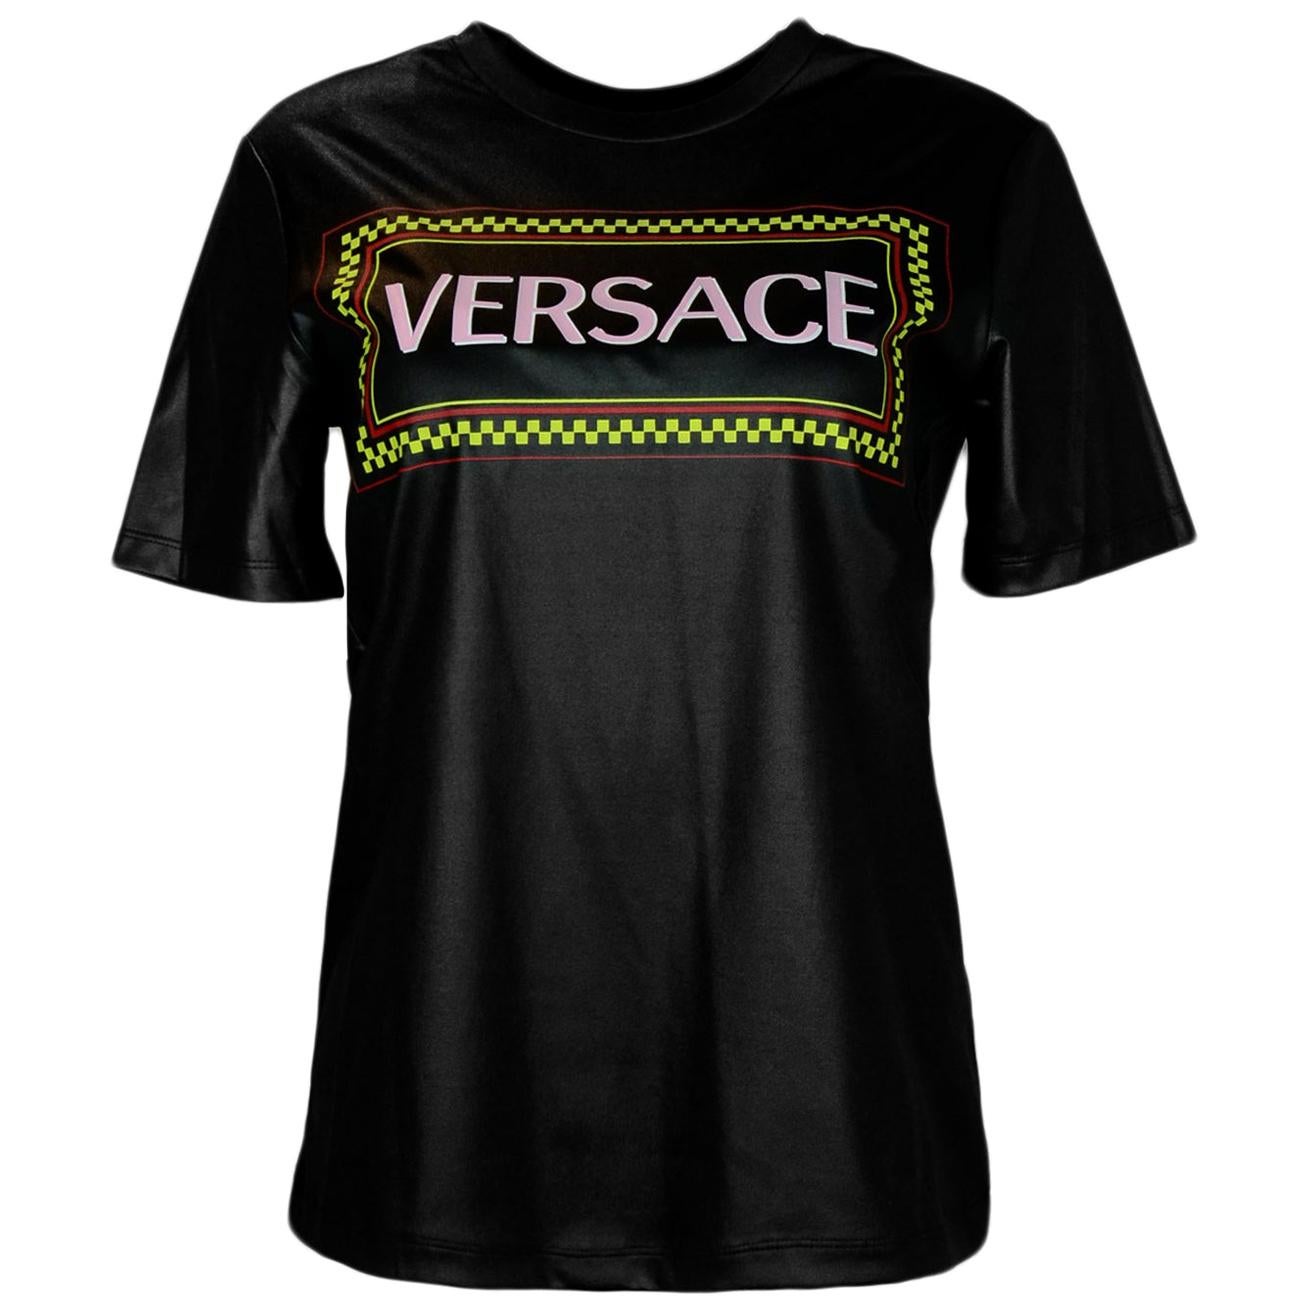 Versace Black Lacquered Jersey 90s Vintage Logo T-Shirt sz IT38/Small